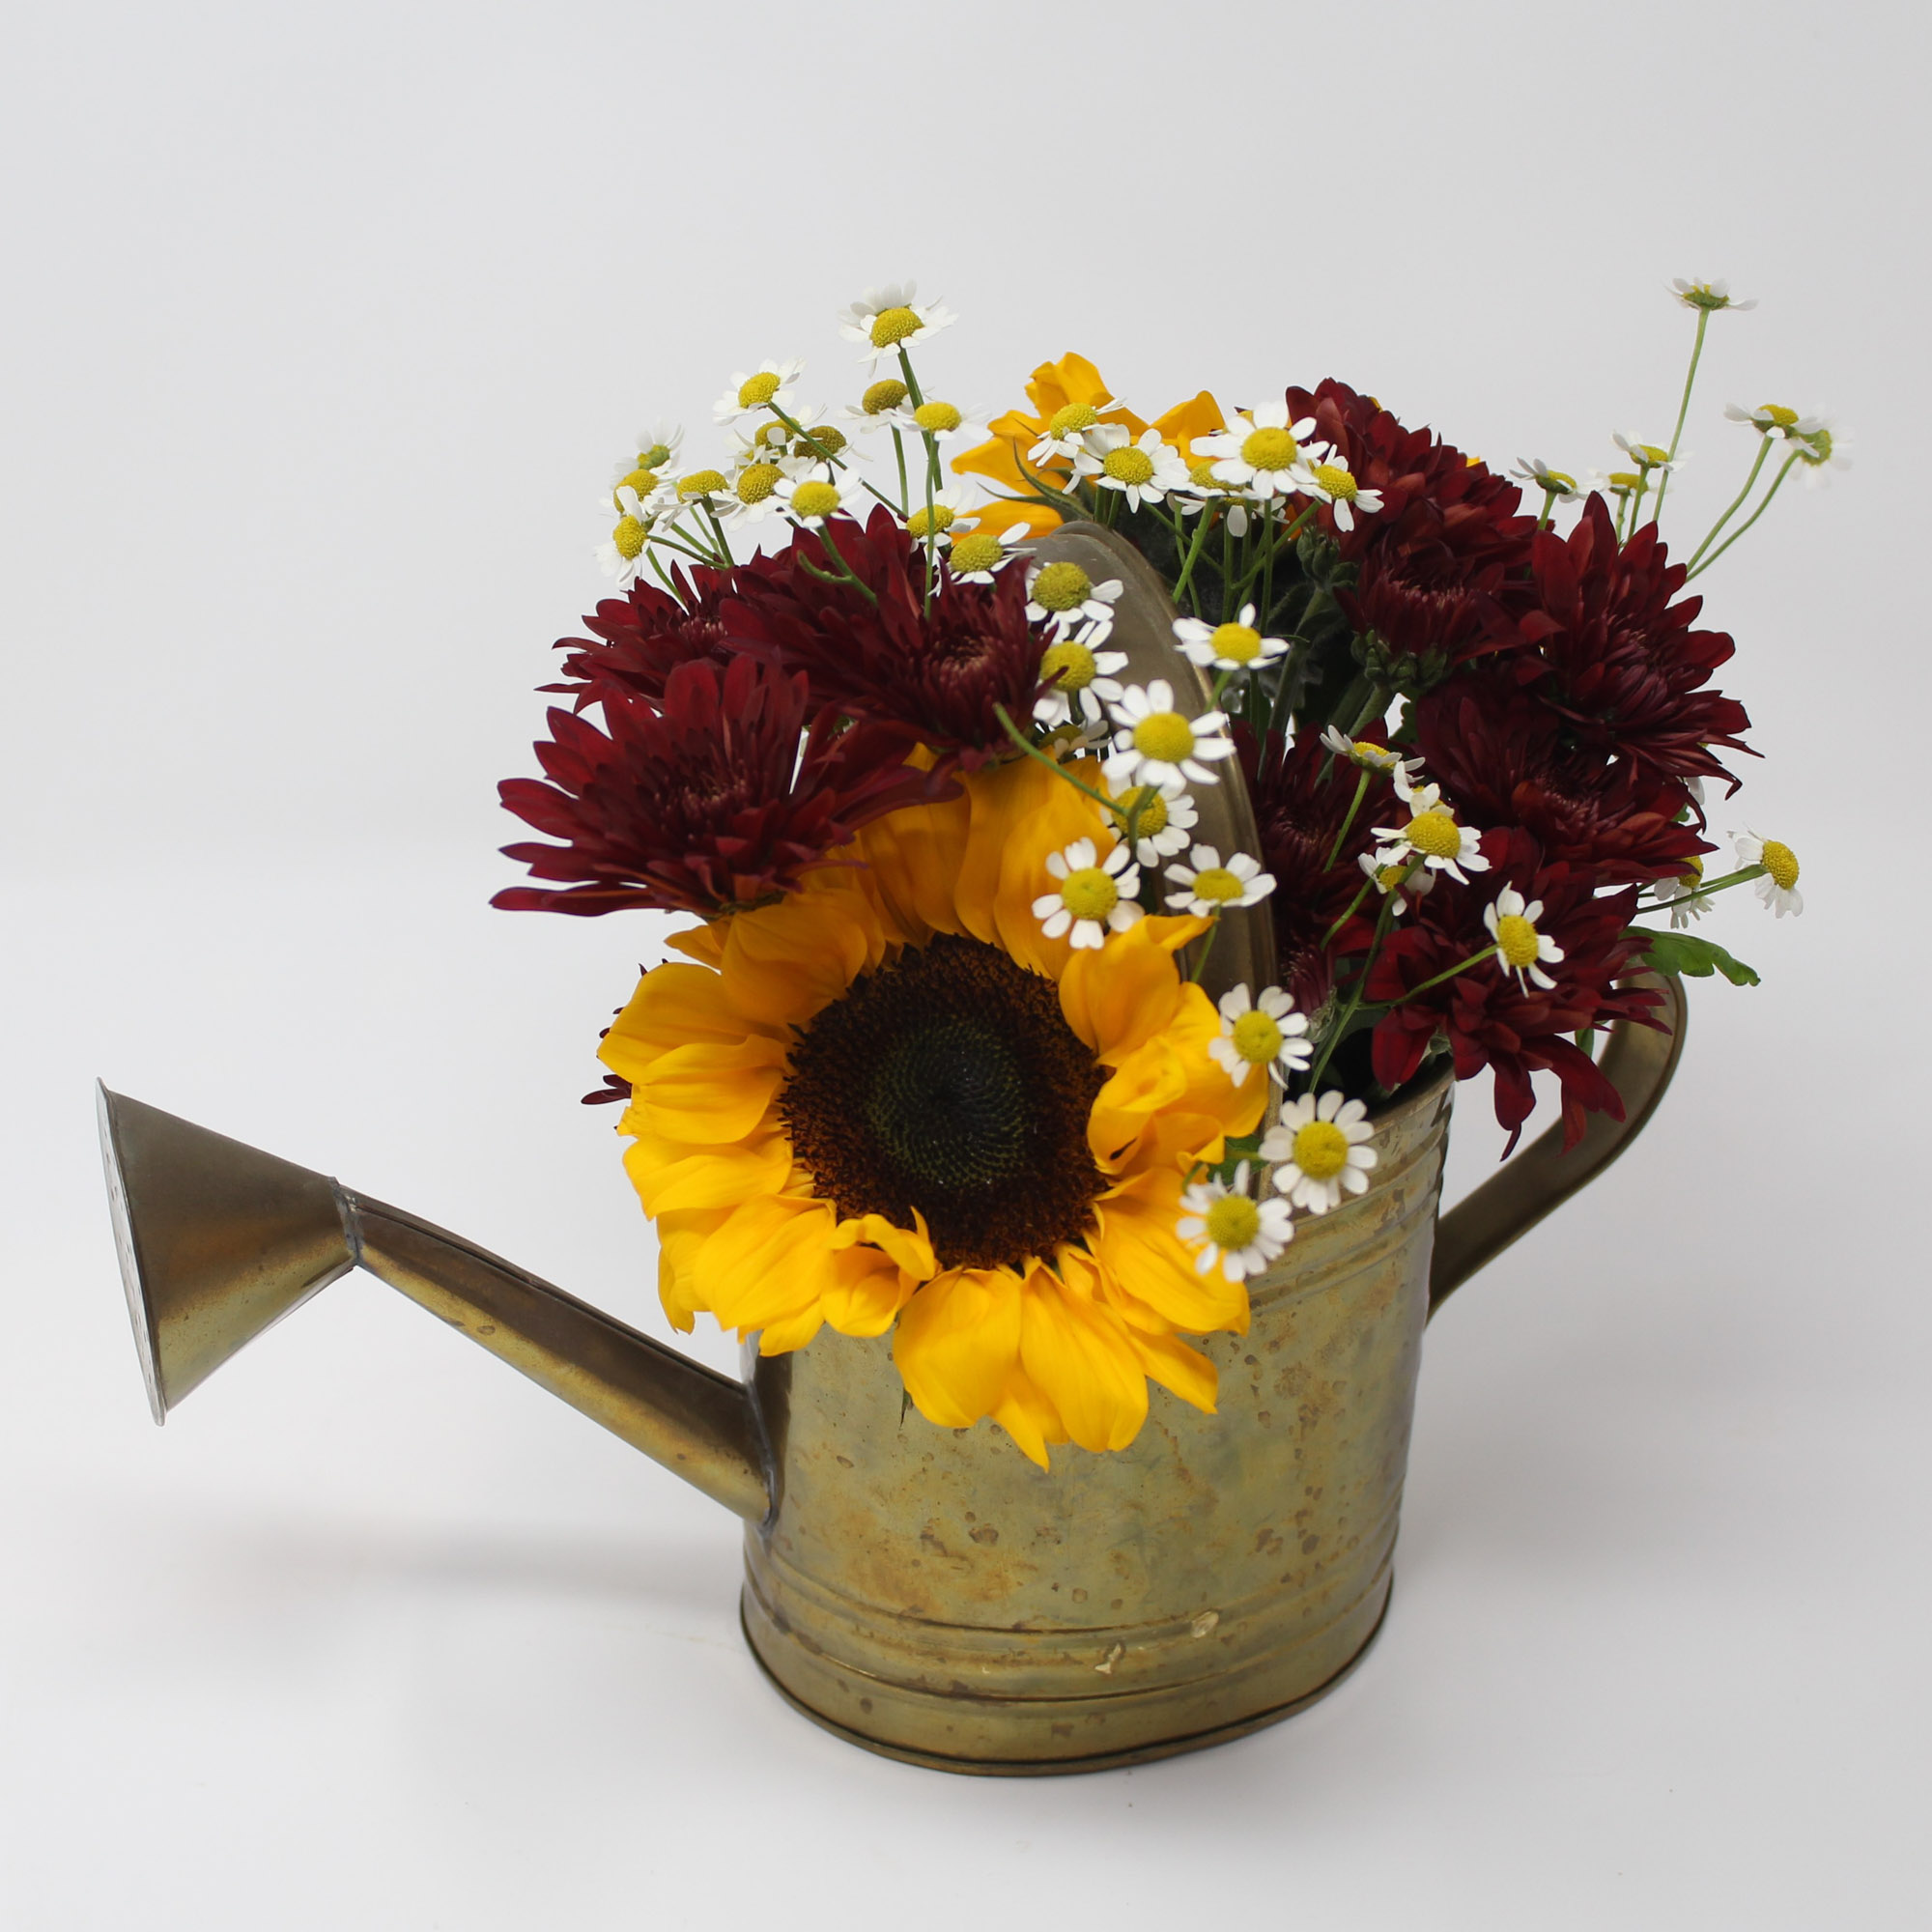 Photo of a floral arrangement with burgundy flowers and sunflowers, in a rustic watering can.